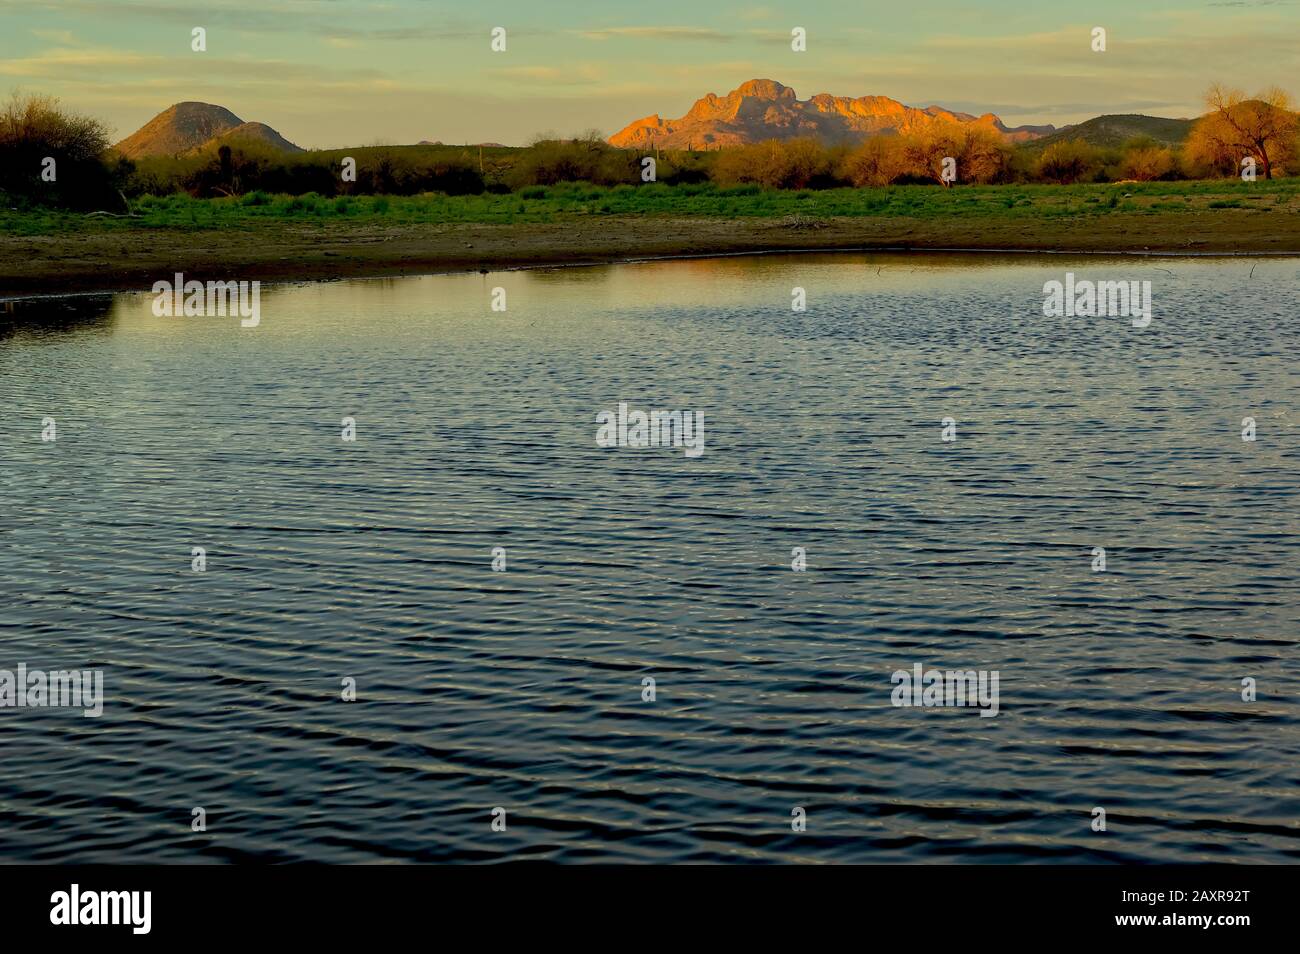 Webb Pond, also known as Webb Tank. An Oasis located in the Gila Bend Mountains of southwestern Arizona. It lies within federal BLM land. No property Stock Photo